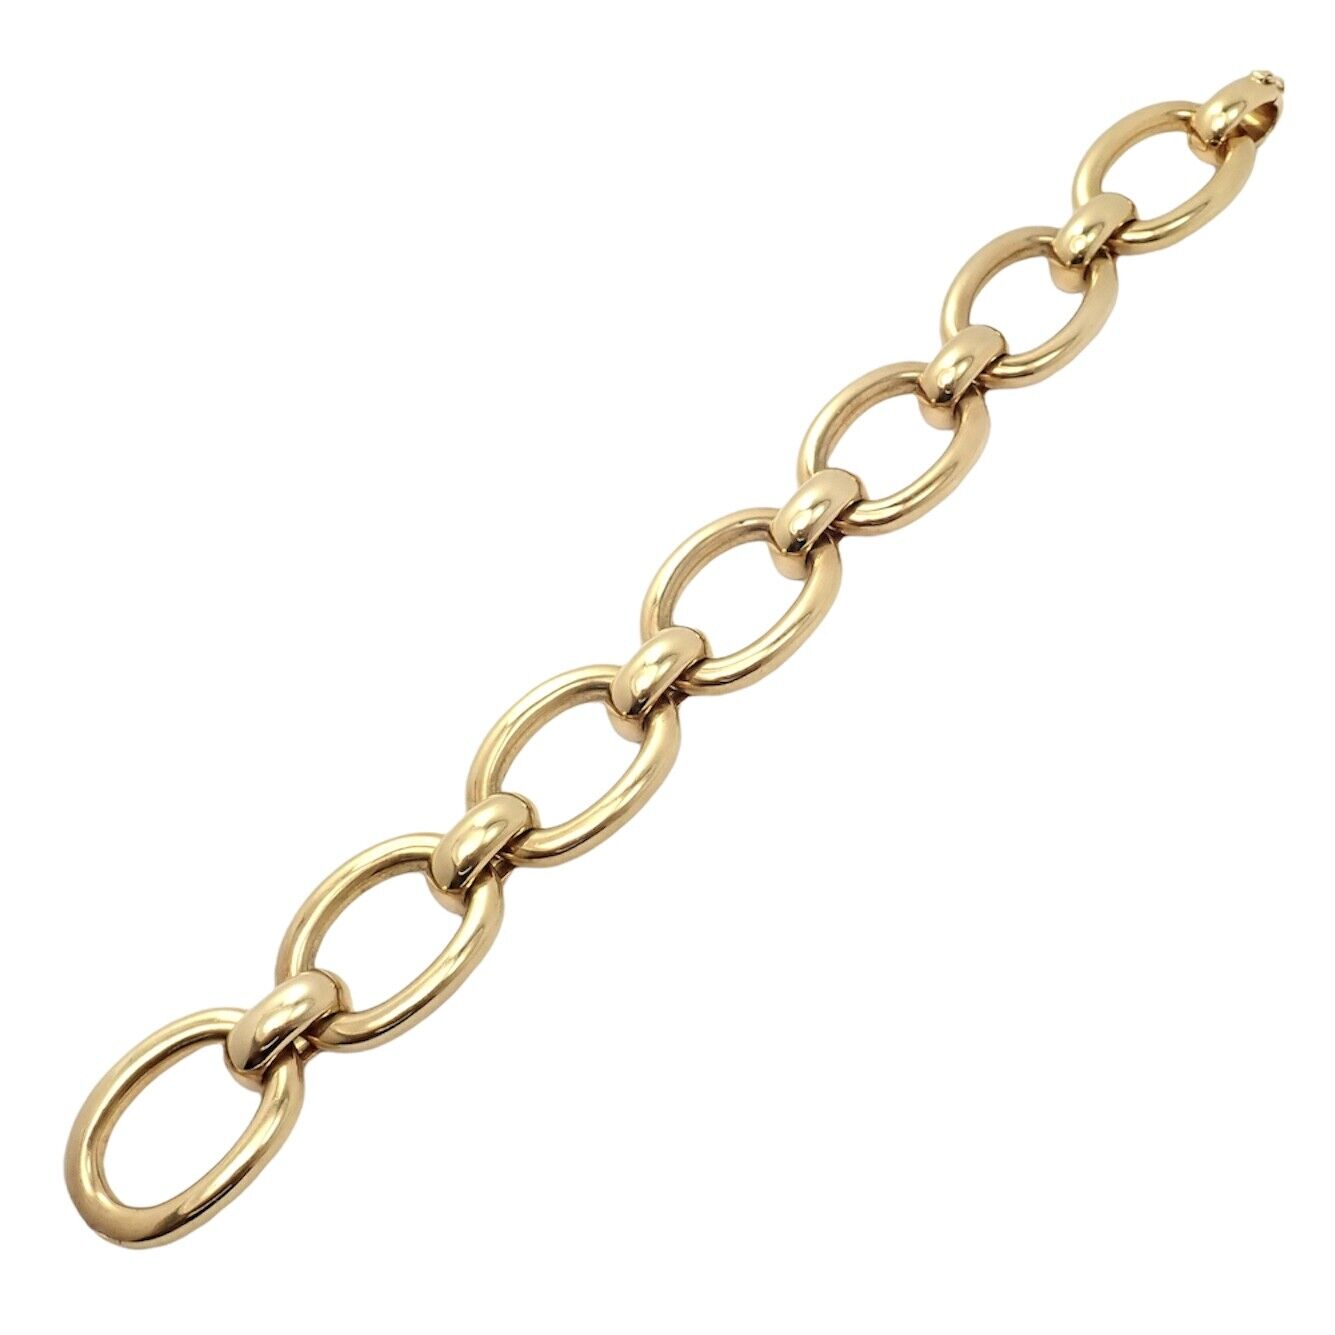 Cartier Jewelry & Watches:Fine Jewelry:Bracelets & Charms Authentic! Cartier 18k Yellow Gold Large Oval Link Bracelet